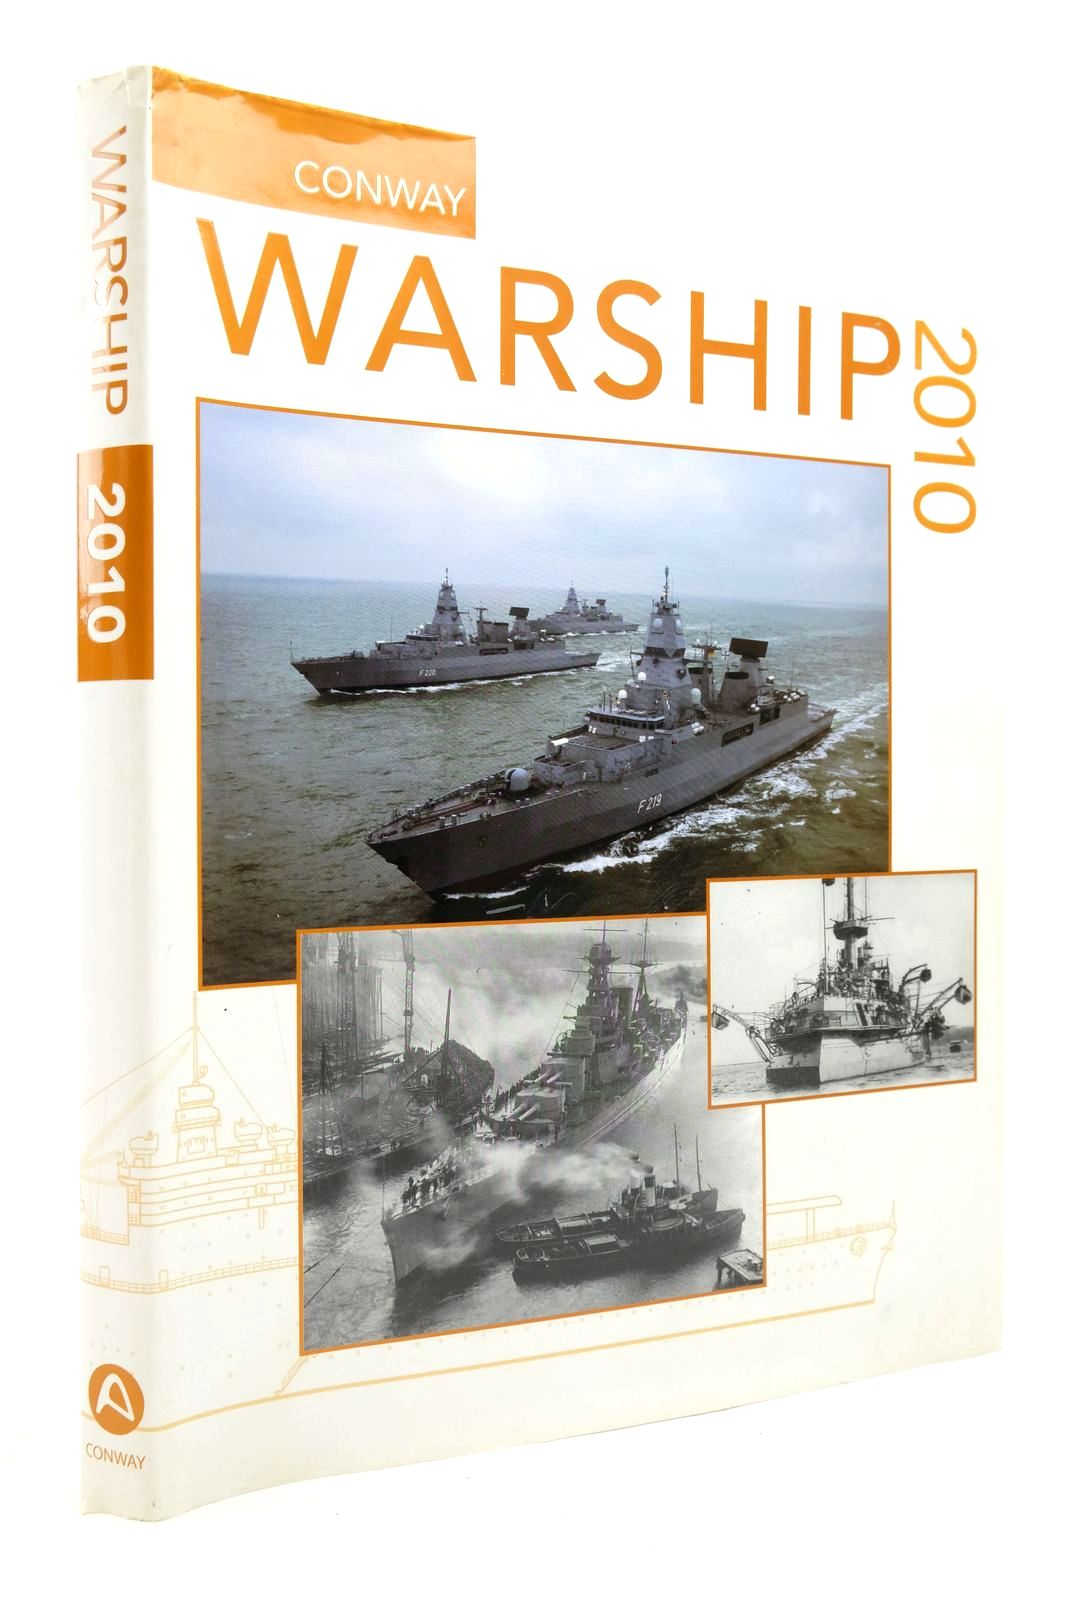 Photo of WARSHIP 2010 written by Jordan, John Dent, Stephen published by Conway (STOCK CODE: 2139996)  for sale by Stella & Rose's Books